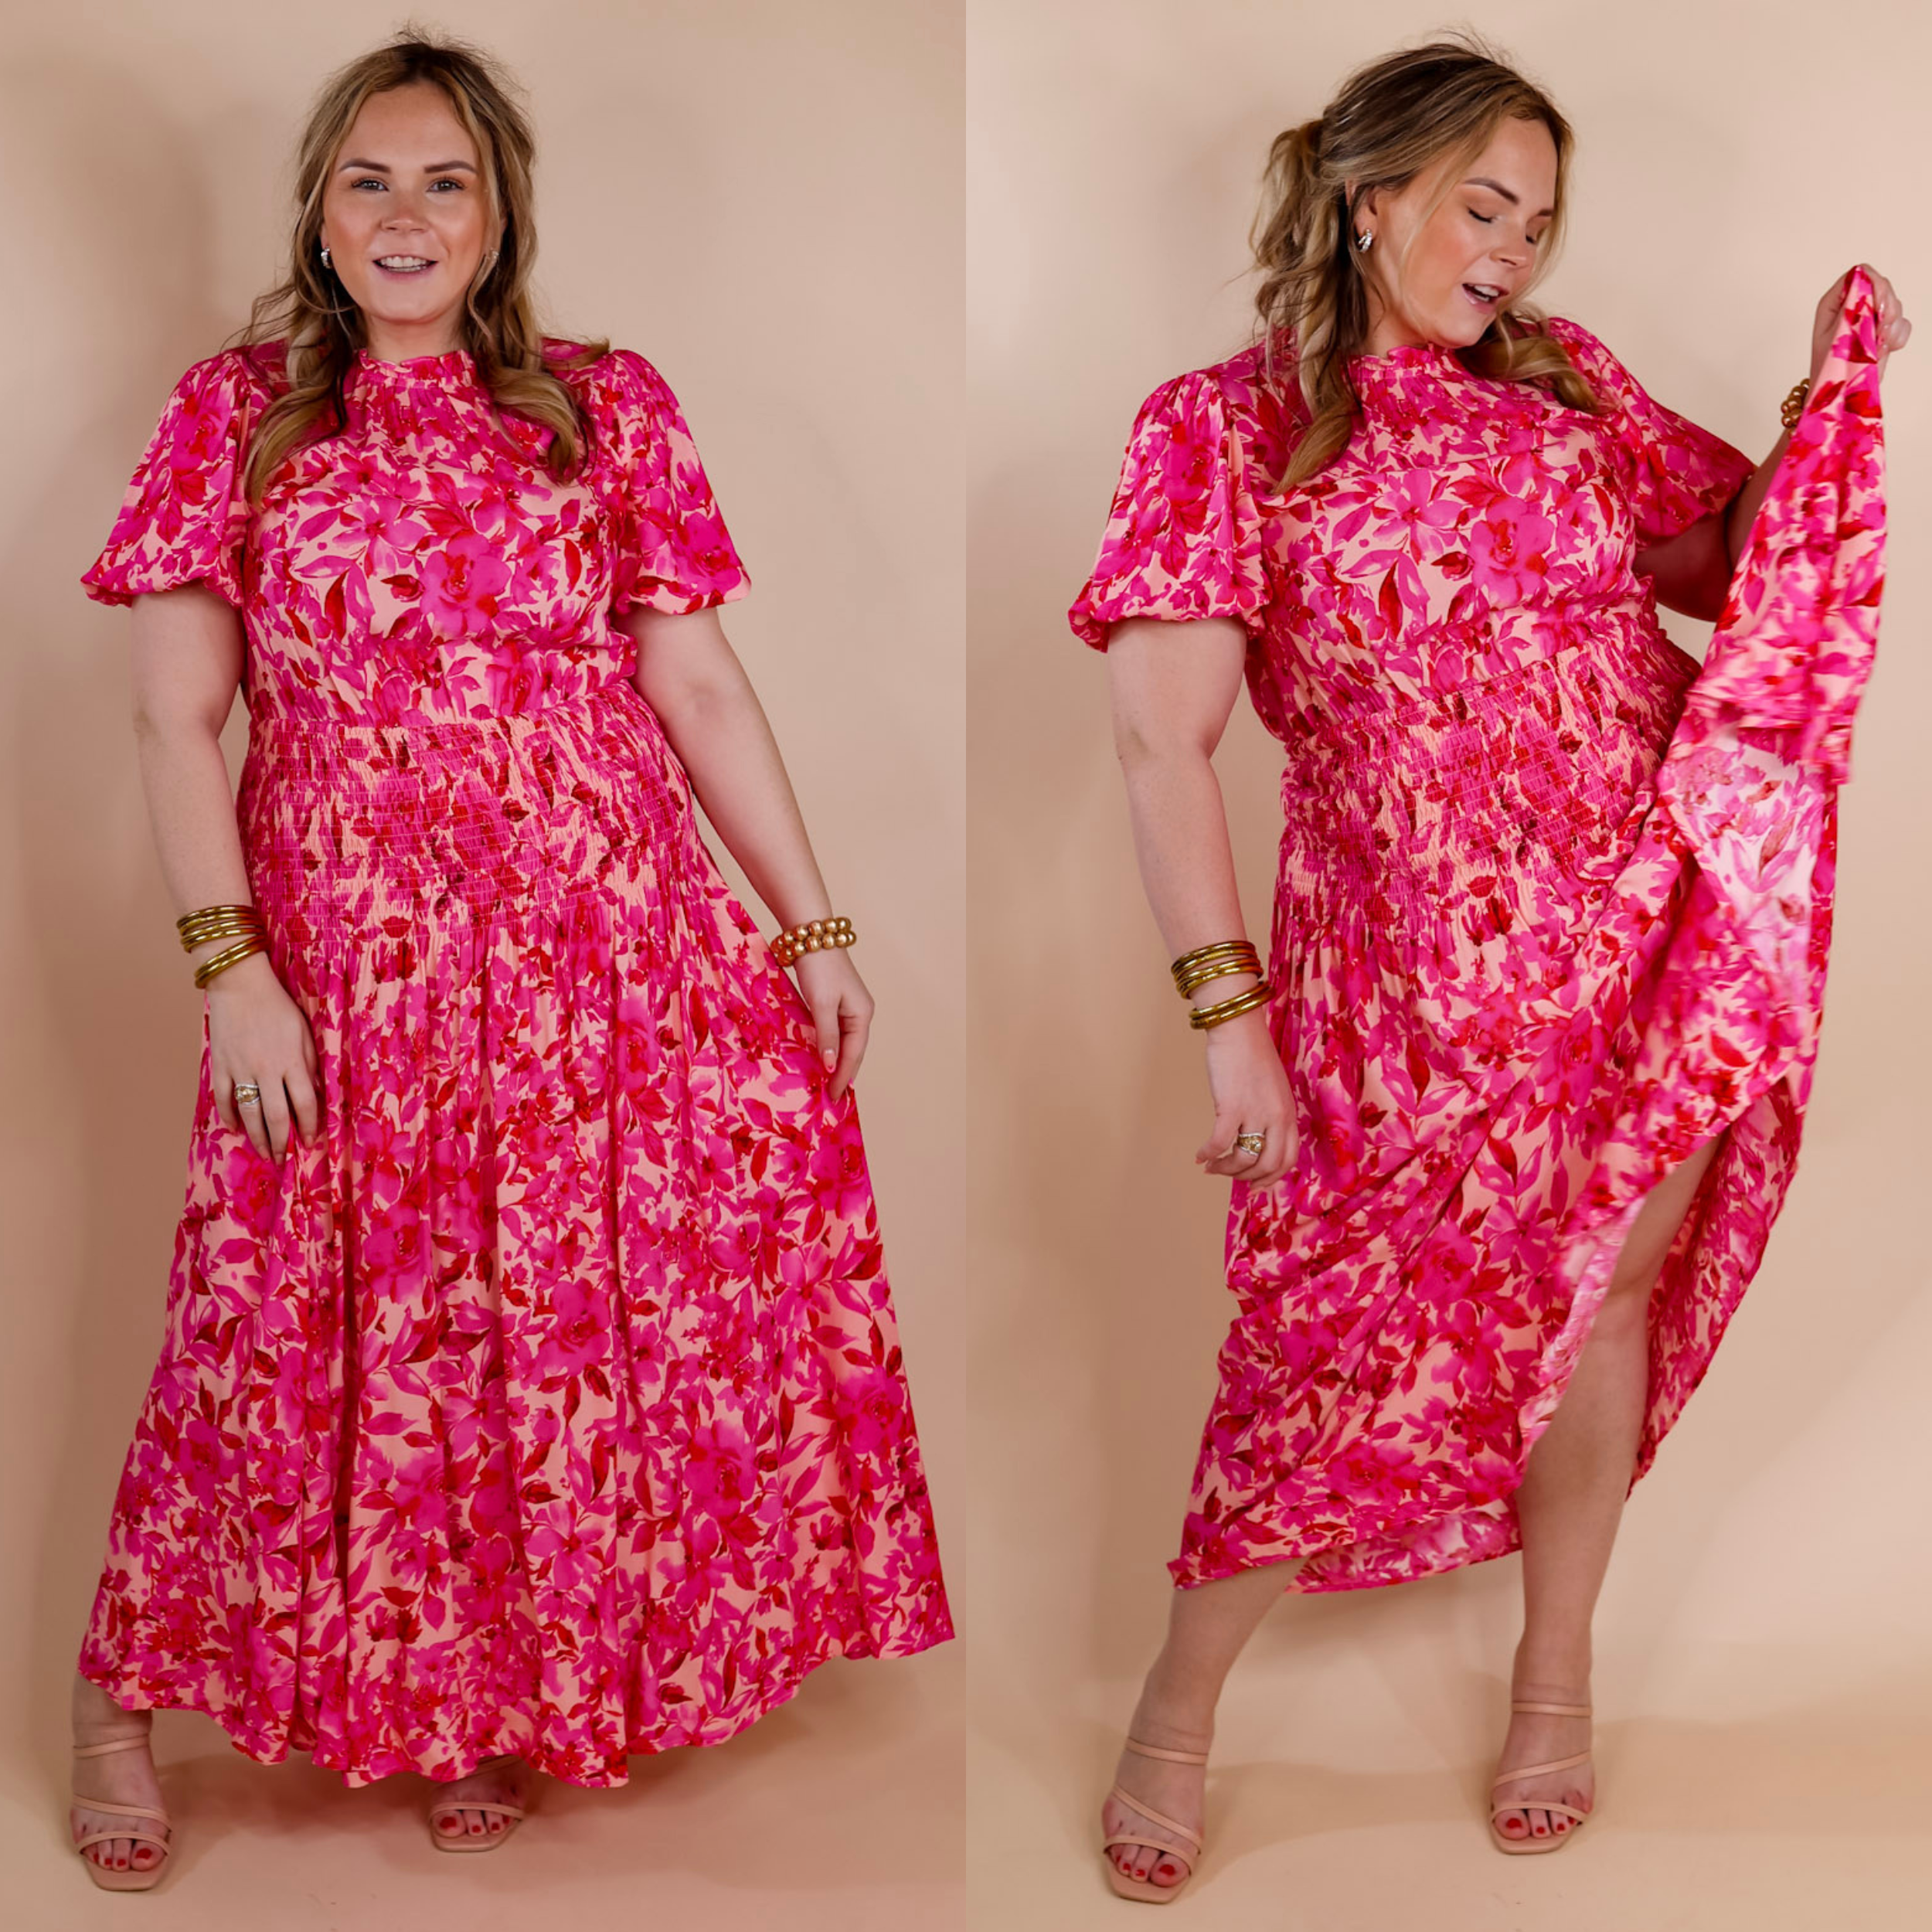 Model is wearing a pink floral maxi dress with short sleeves, a smocked waistline, and a high ruffle neck. Model has it paired with gold jewelry and nude heels.